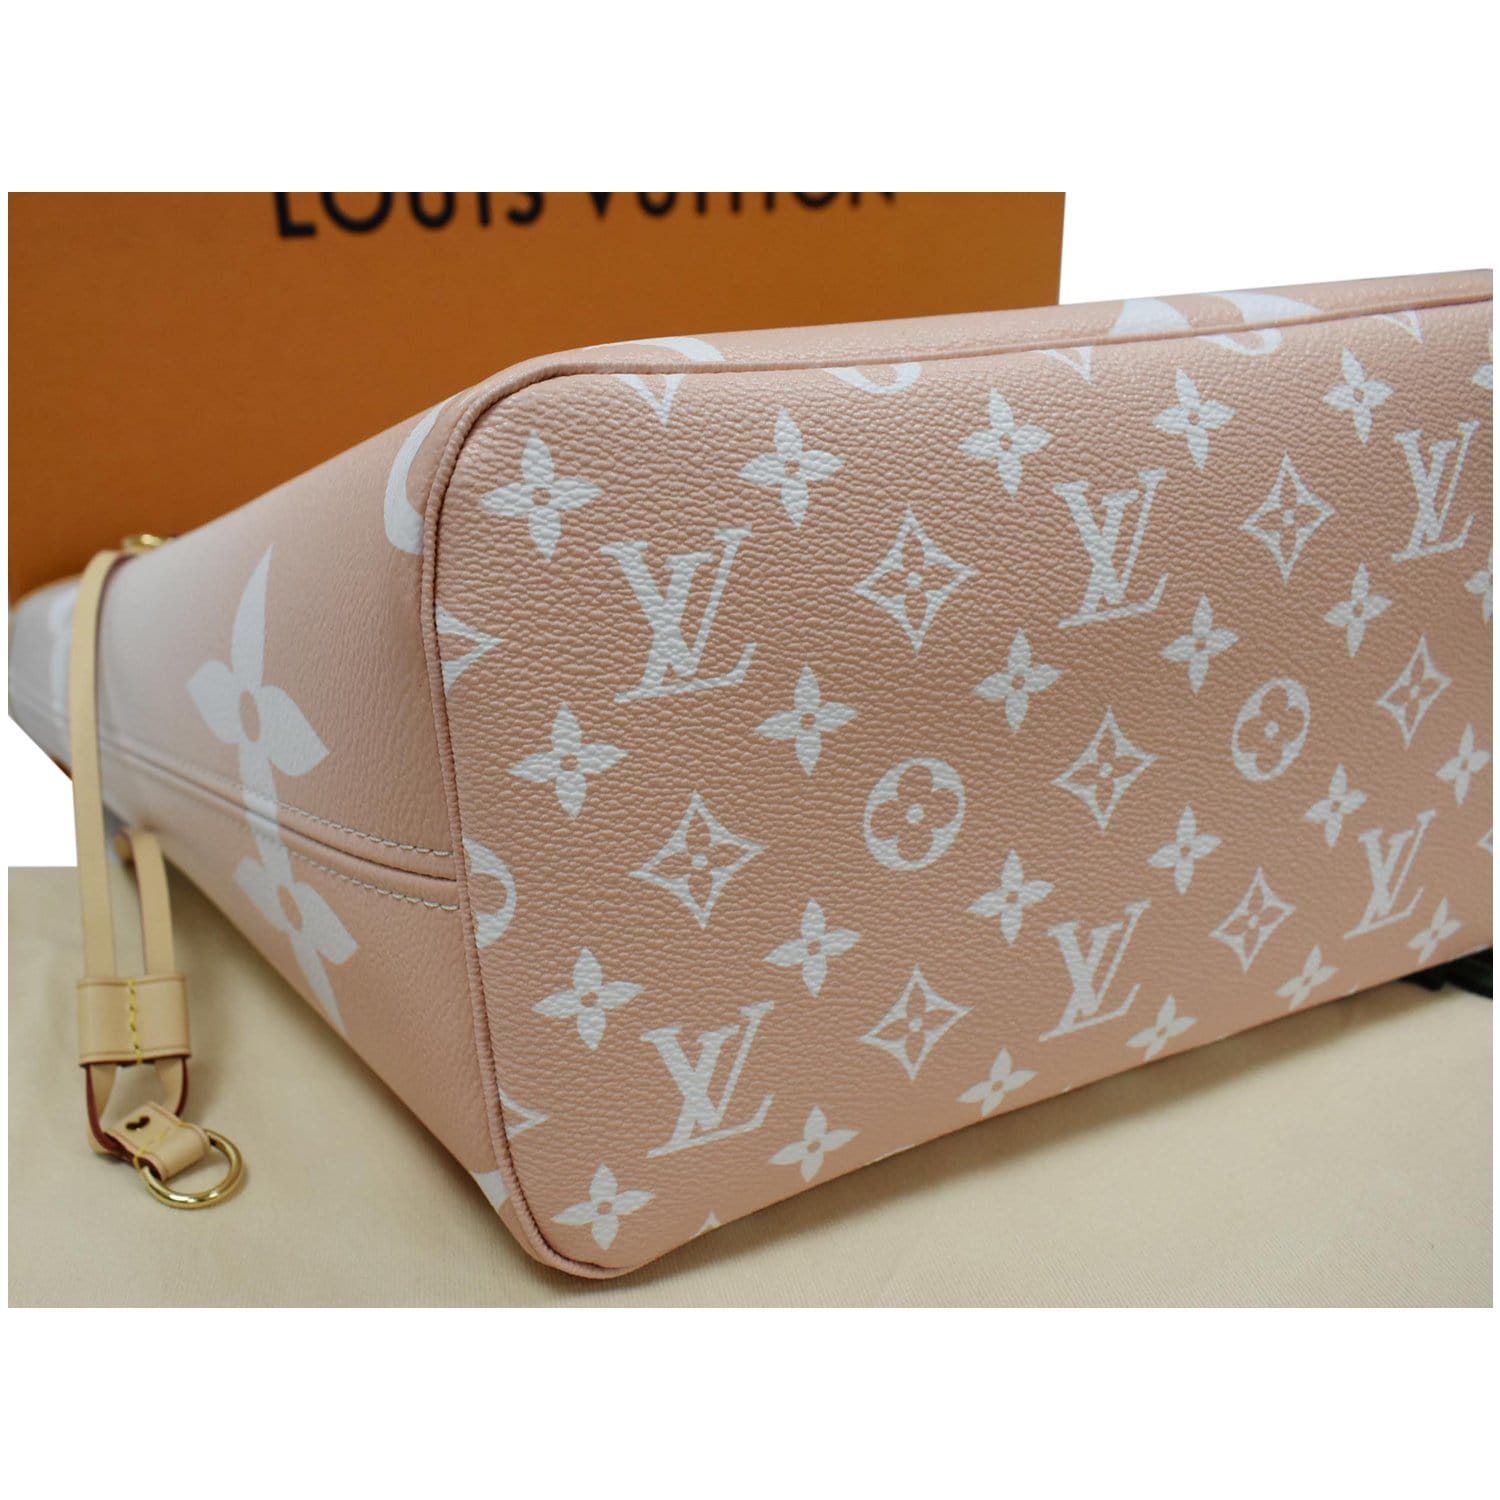 Louis Vuitton Neverfull MM by The Pool Tote